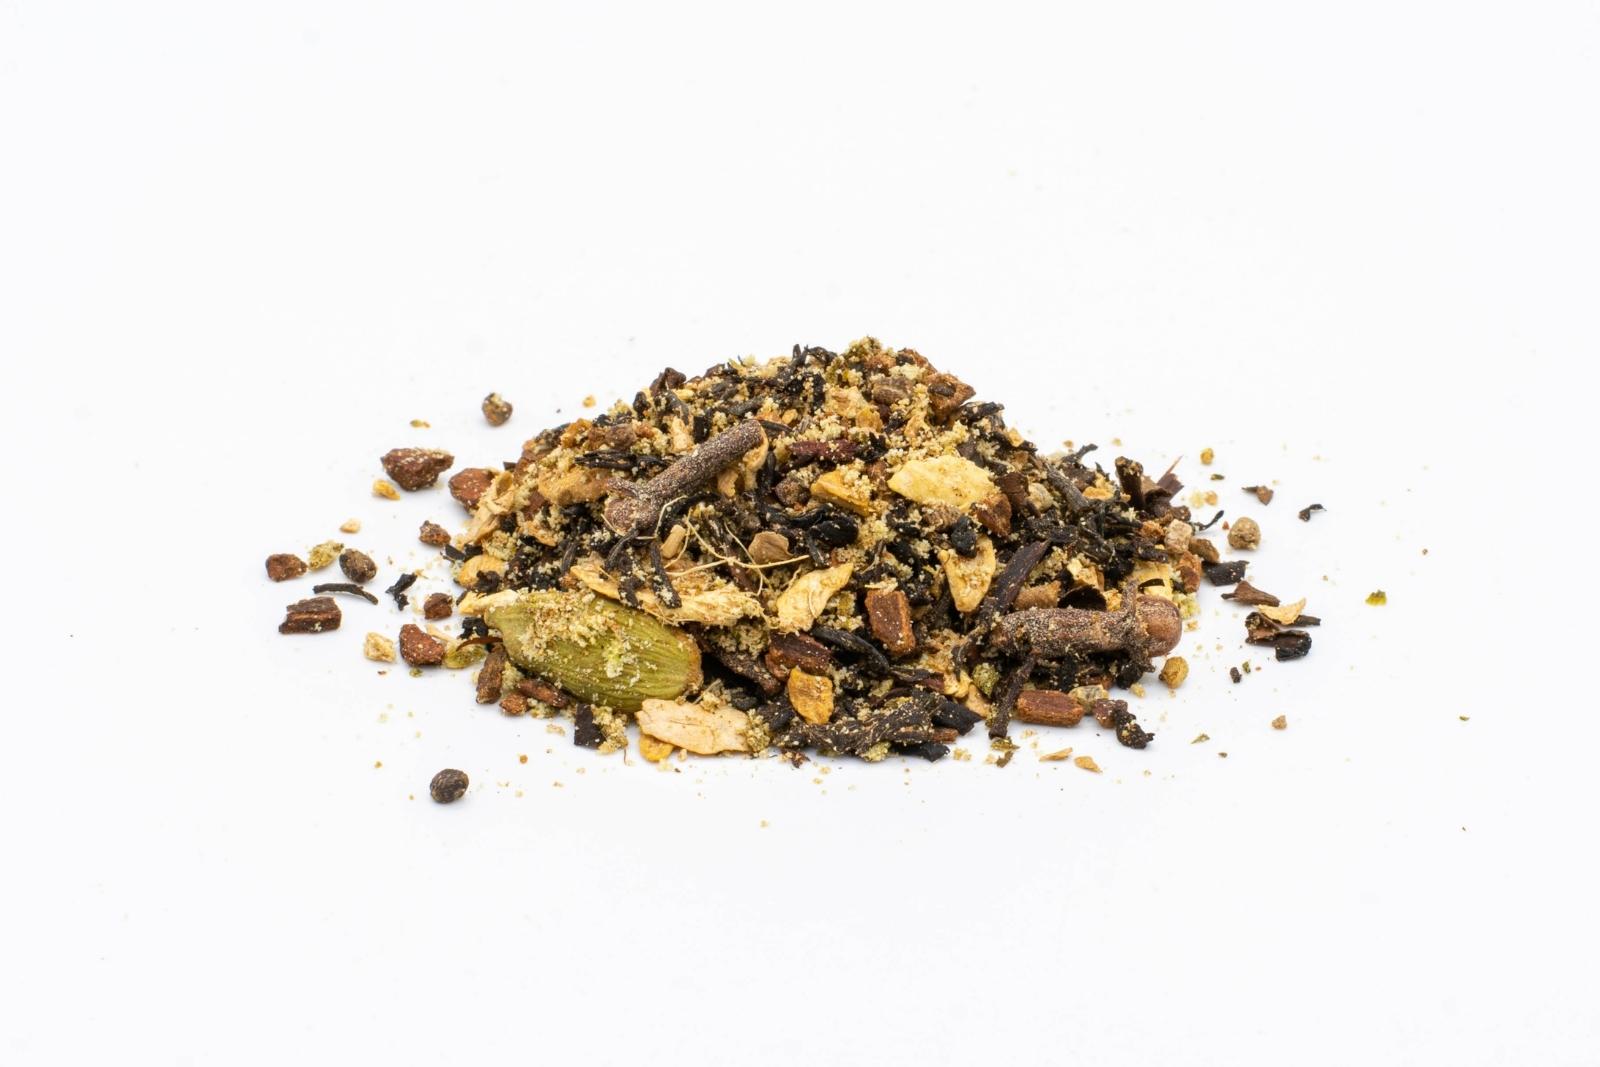 A pile of loose Chai Awakening CBD Tea by The Brothers Apothecary on a white background